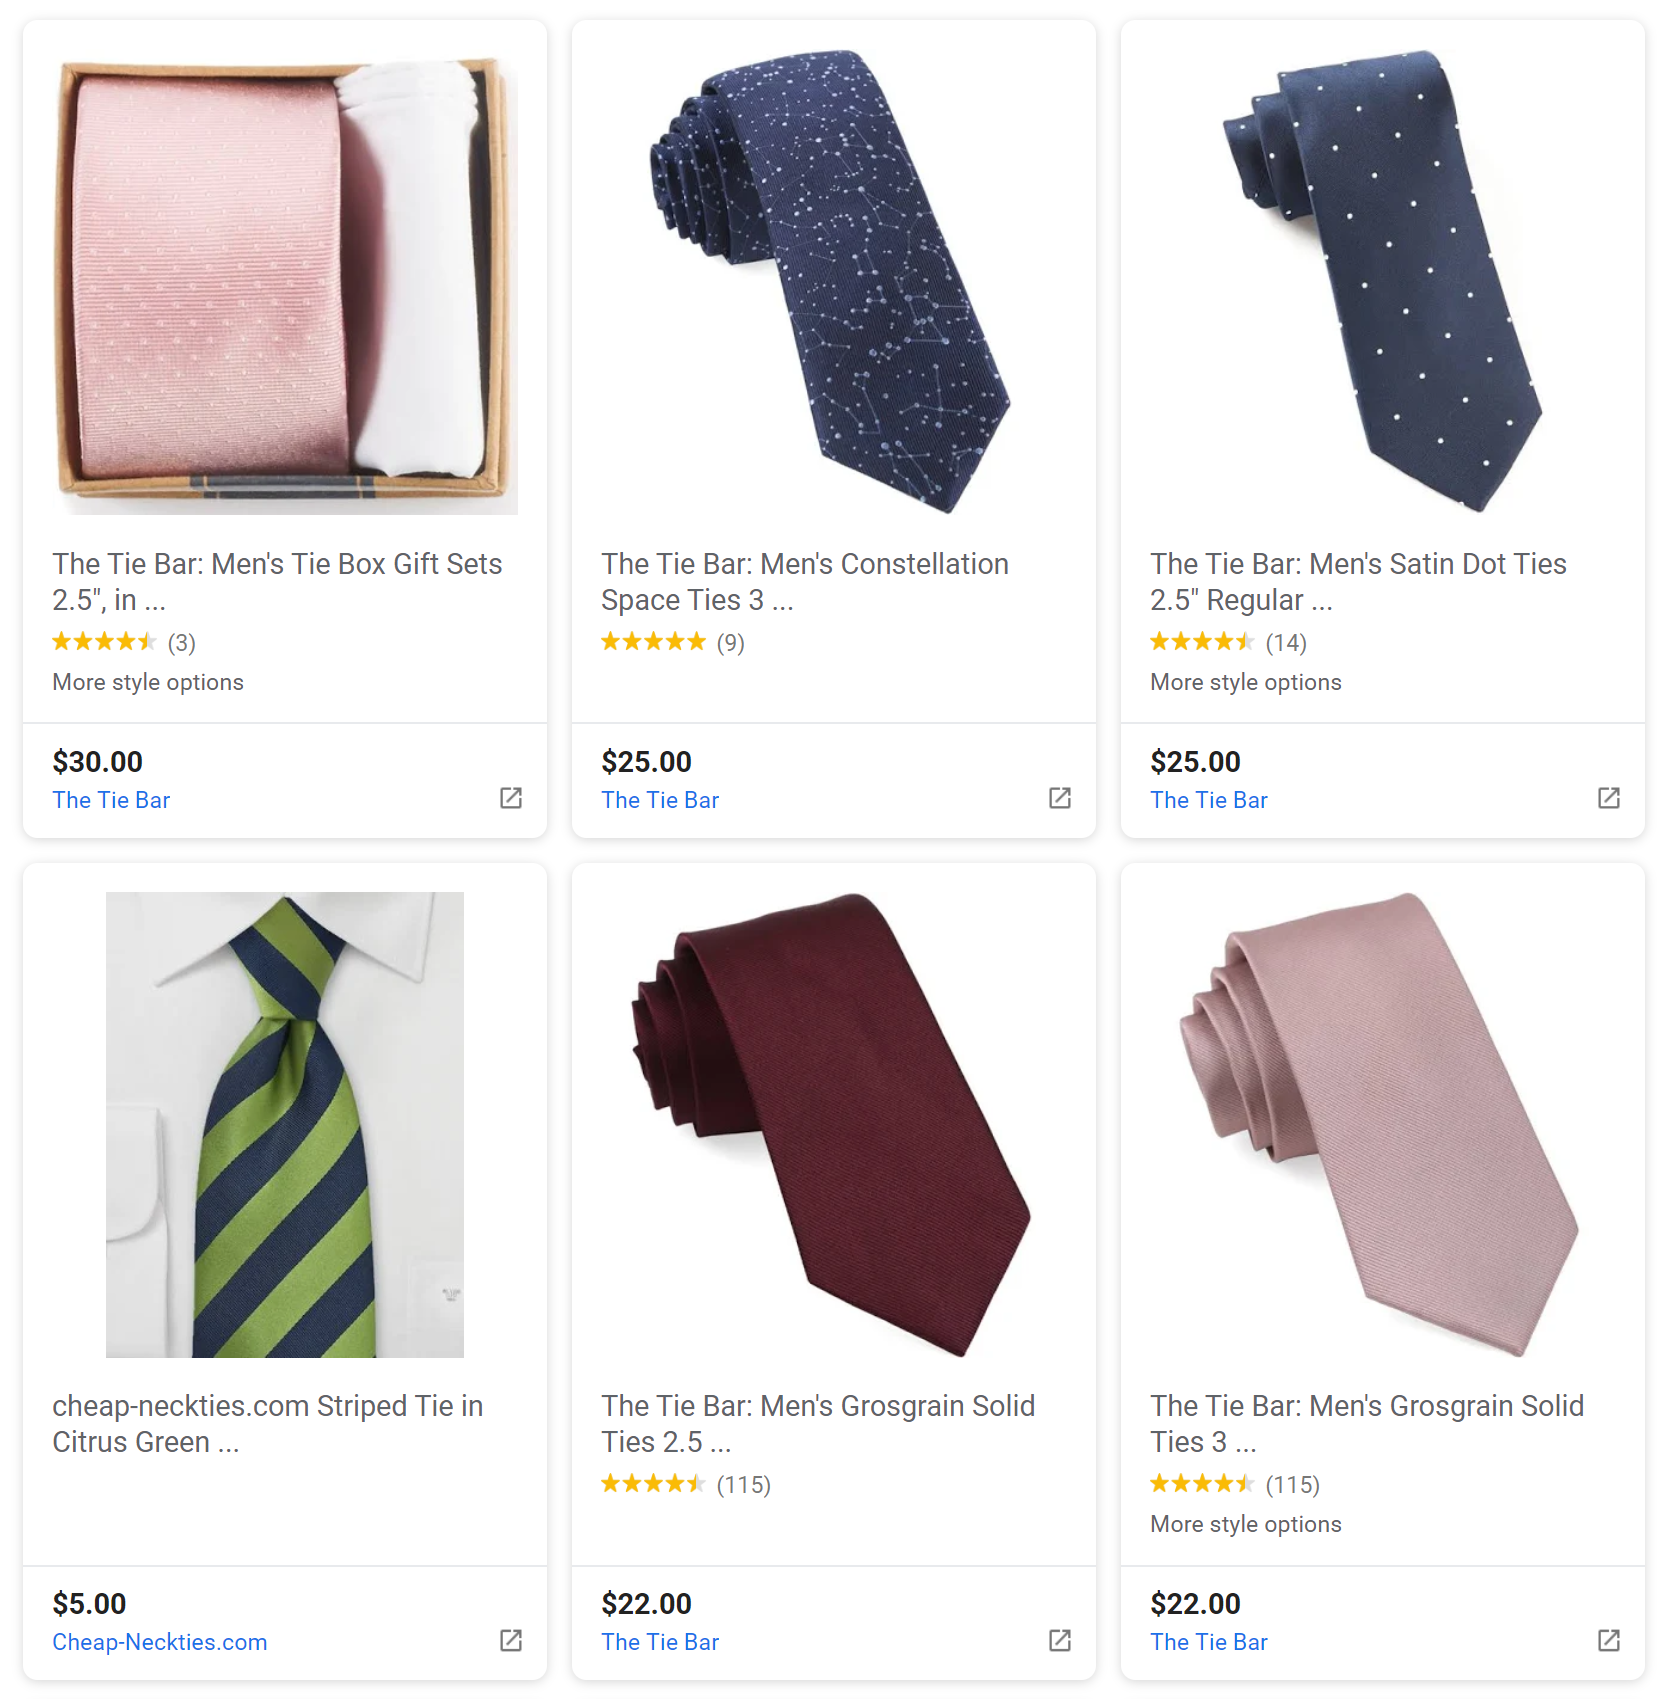 The Tie Bar products